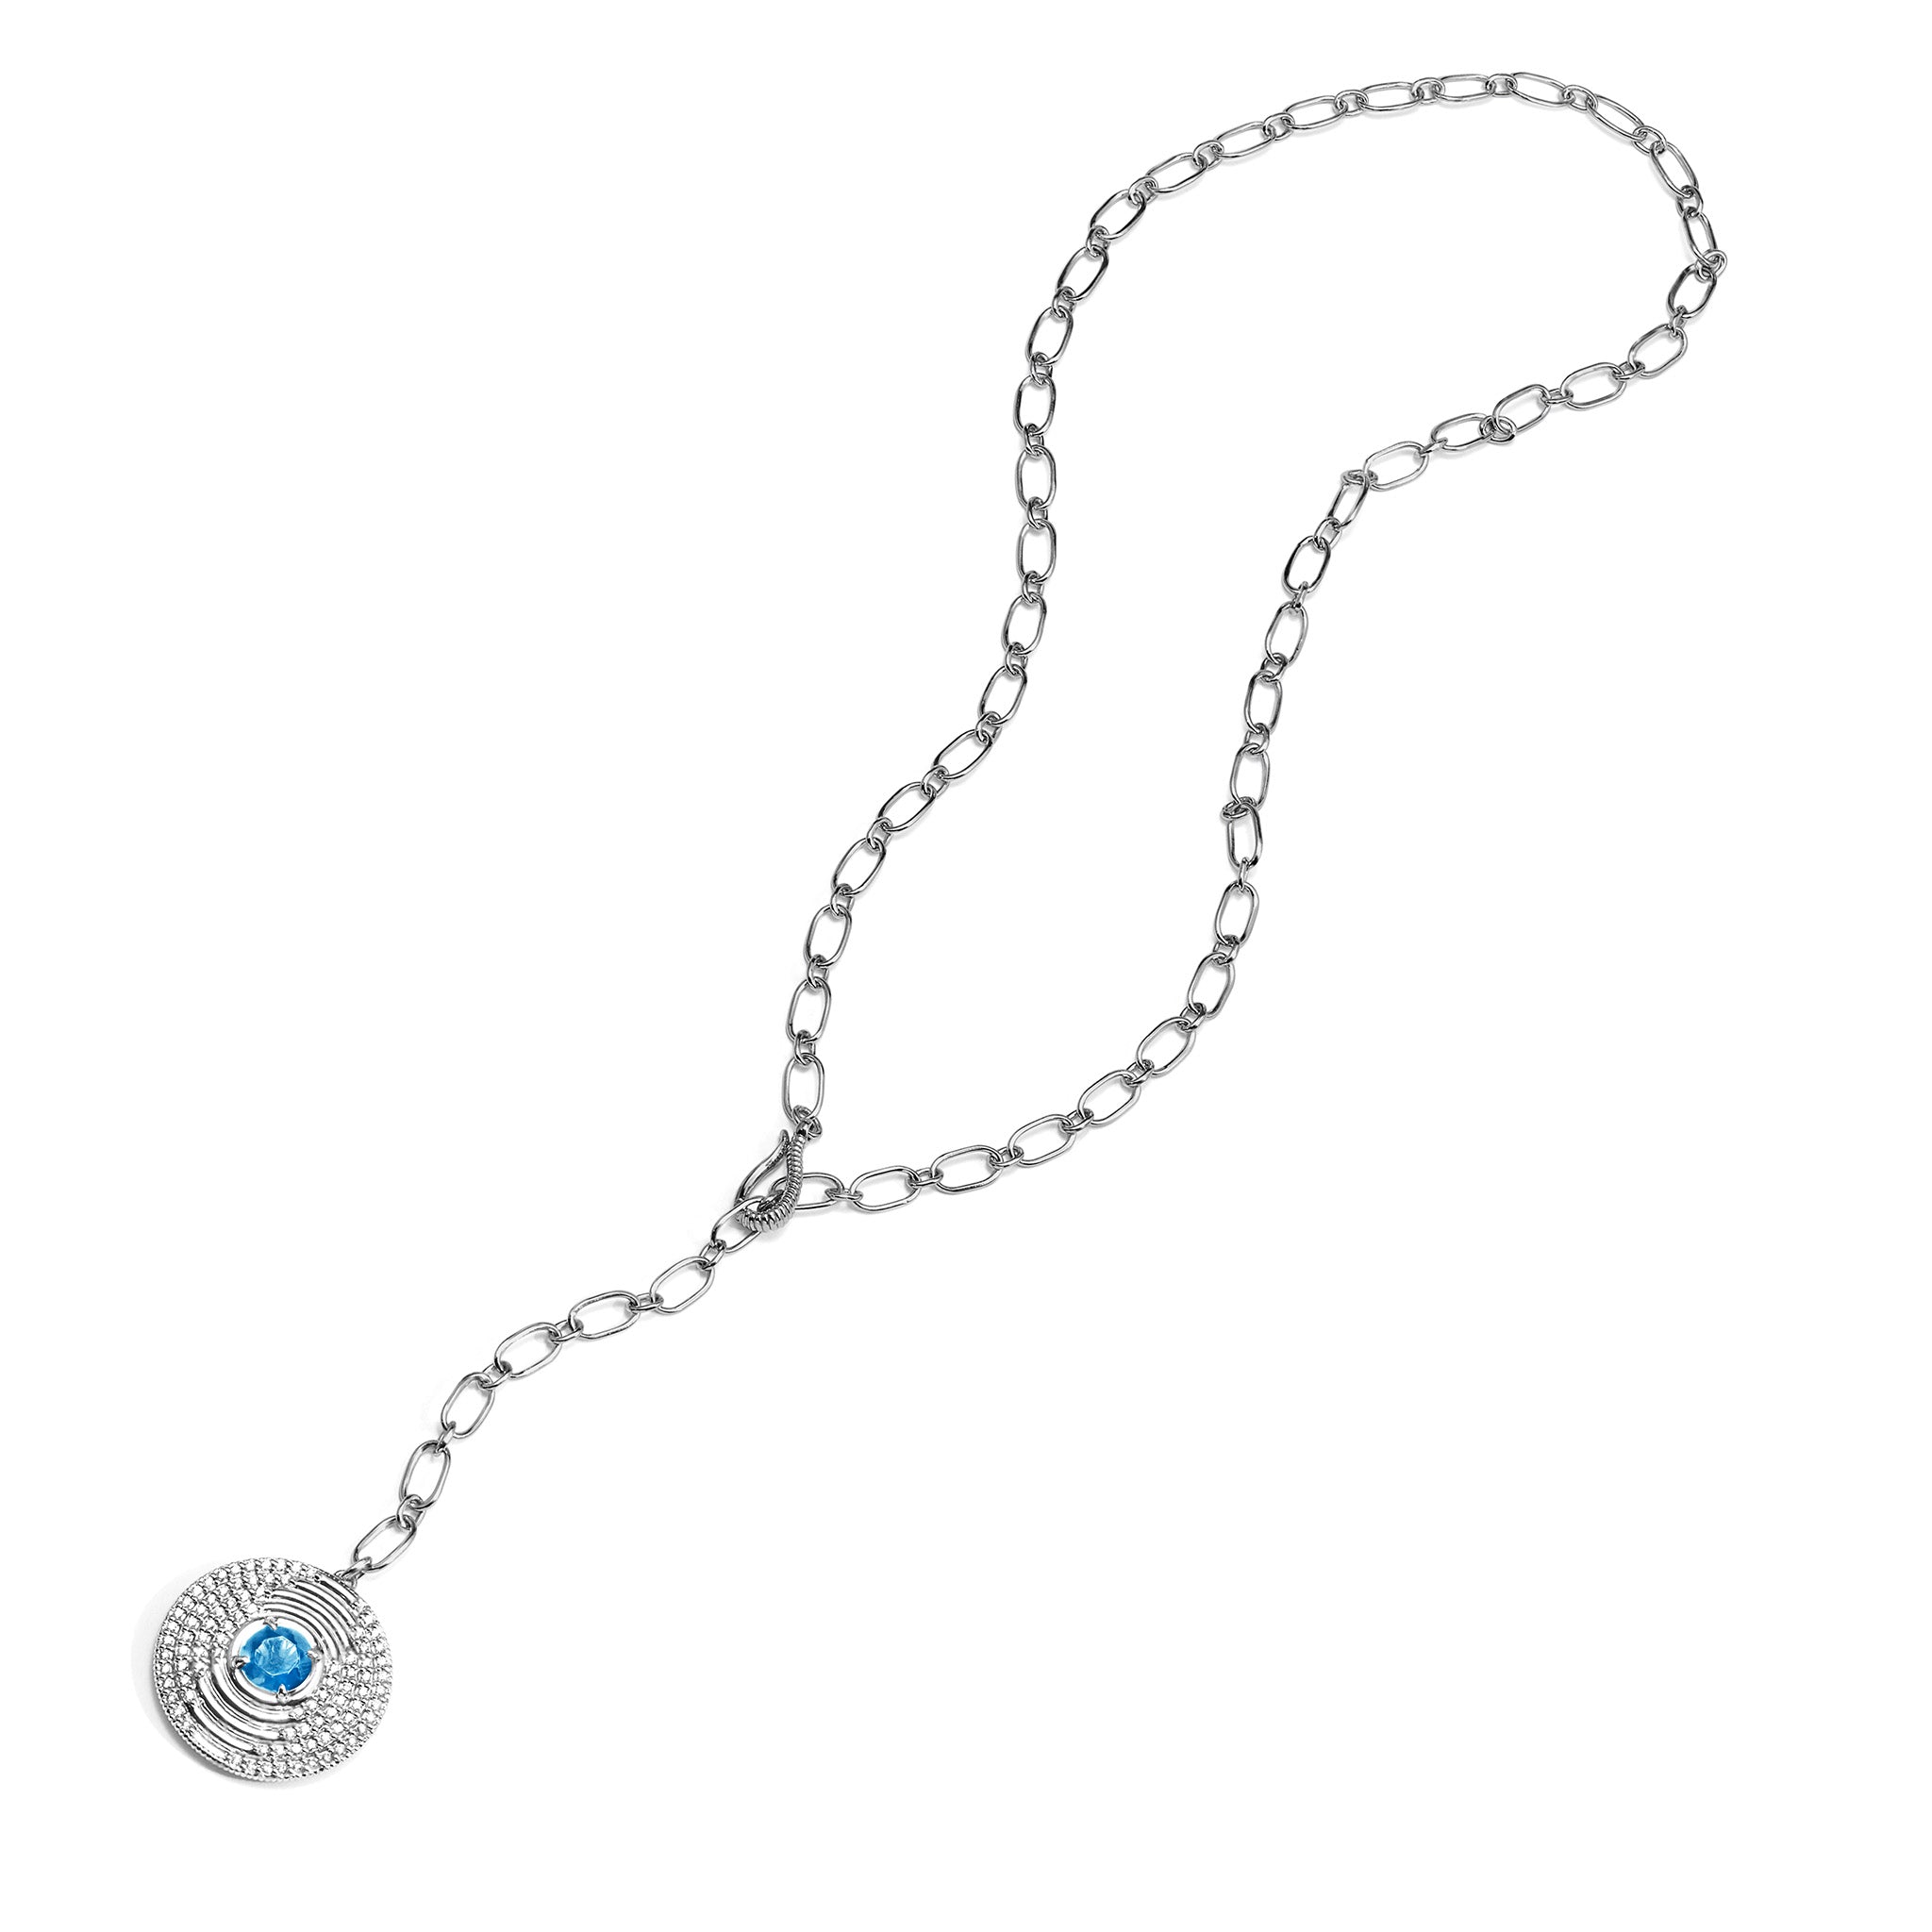 Max Drop Necklace with Swiss Blue Topaz and Diamonds